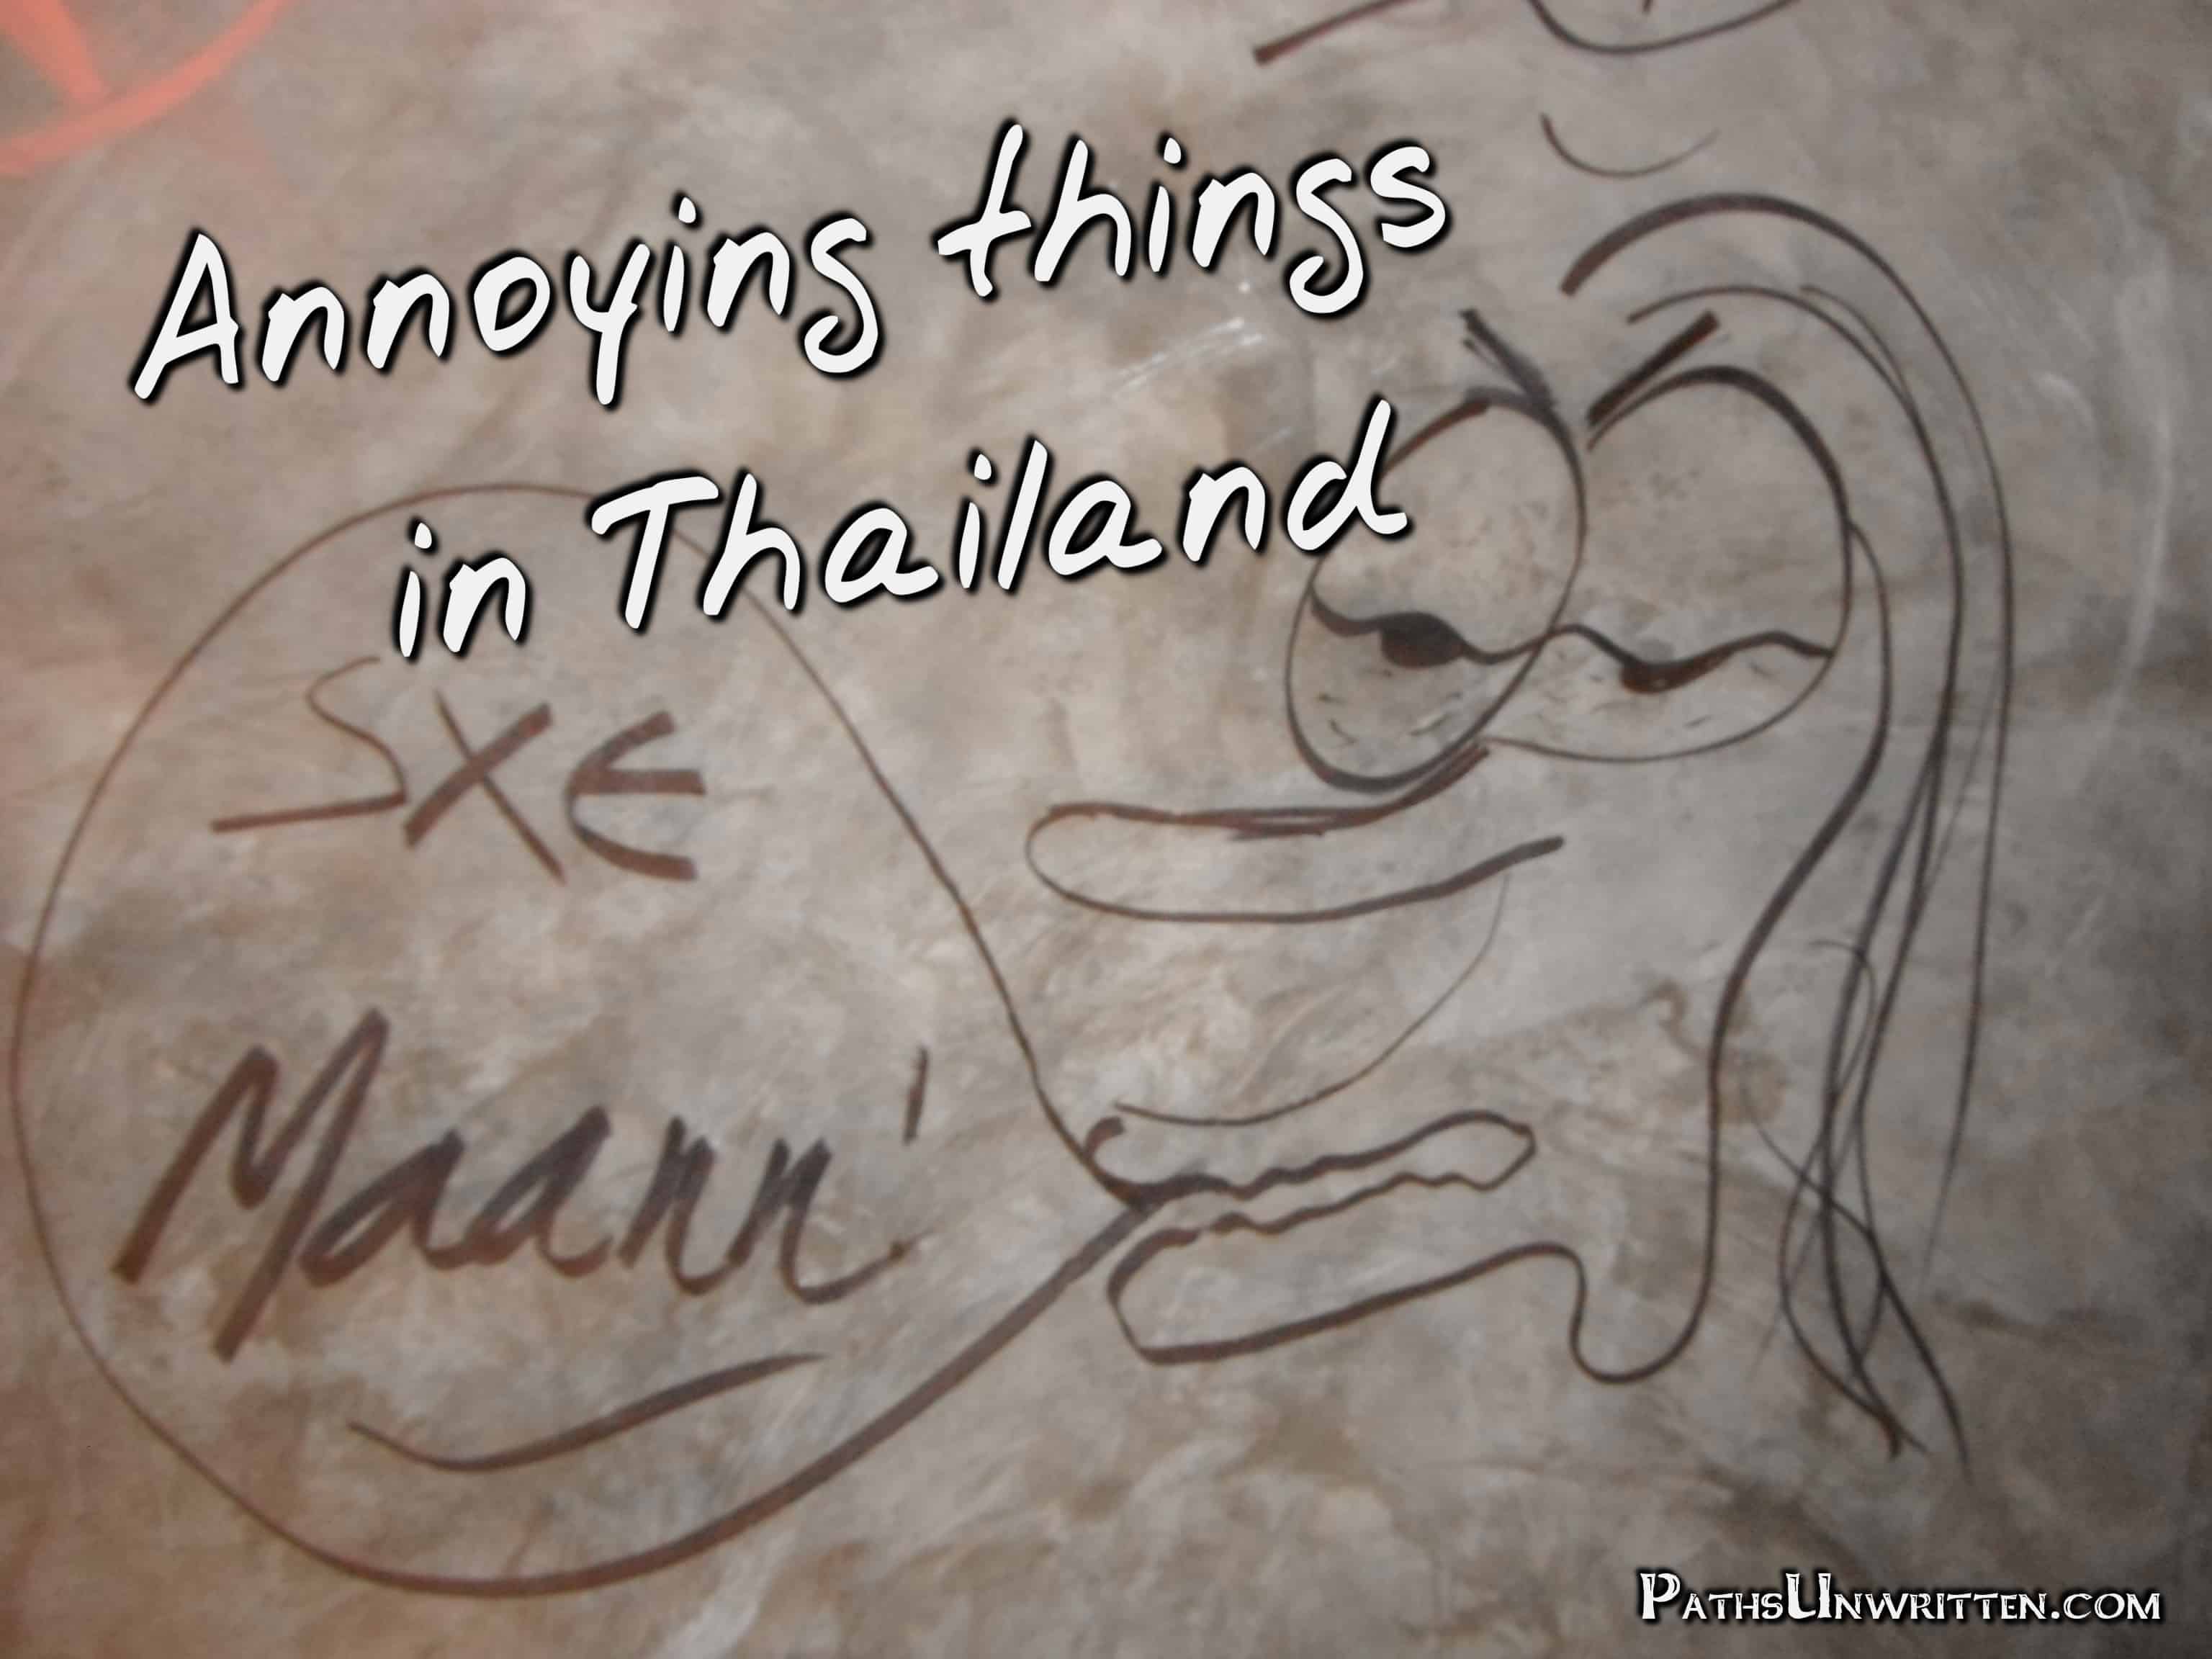 Annoying Things in Thailand